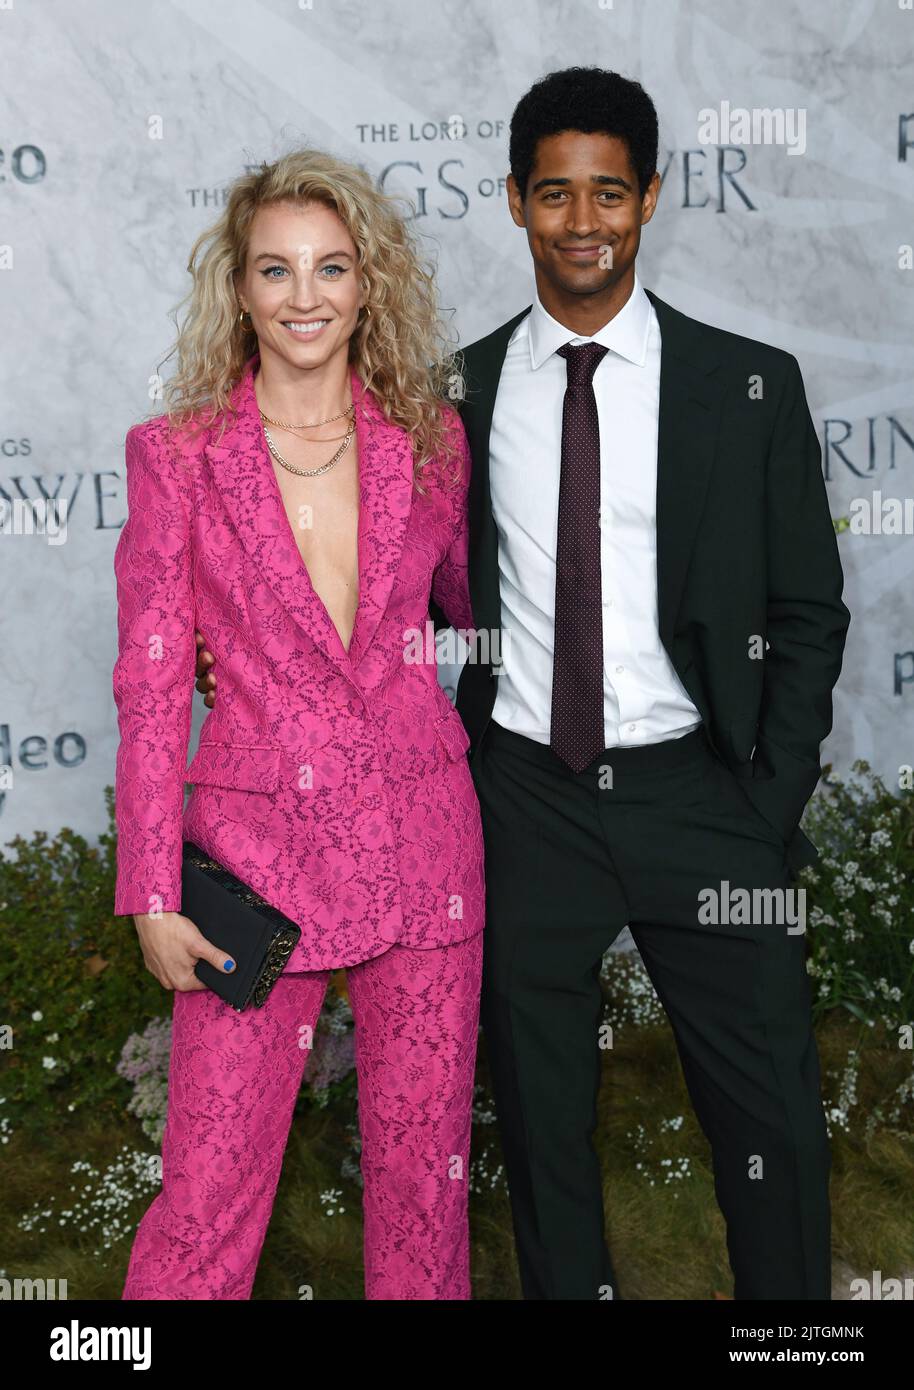 August 30th, 2022. London, UK. Alfred Enoch and Mona Godfrey arriving at the Global Premiere of The Lord of the Rings: The Rings of Power, Odeon Cinema, Leicester Square, London. Credit: Doug Peters/EMPICS/Alamy Live News Stock Photo